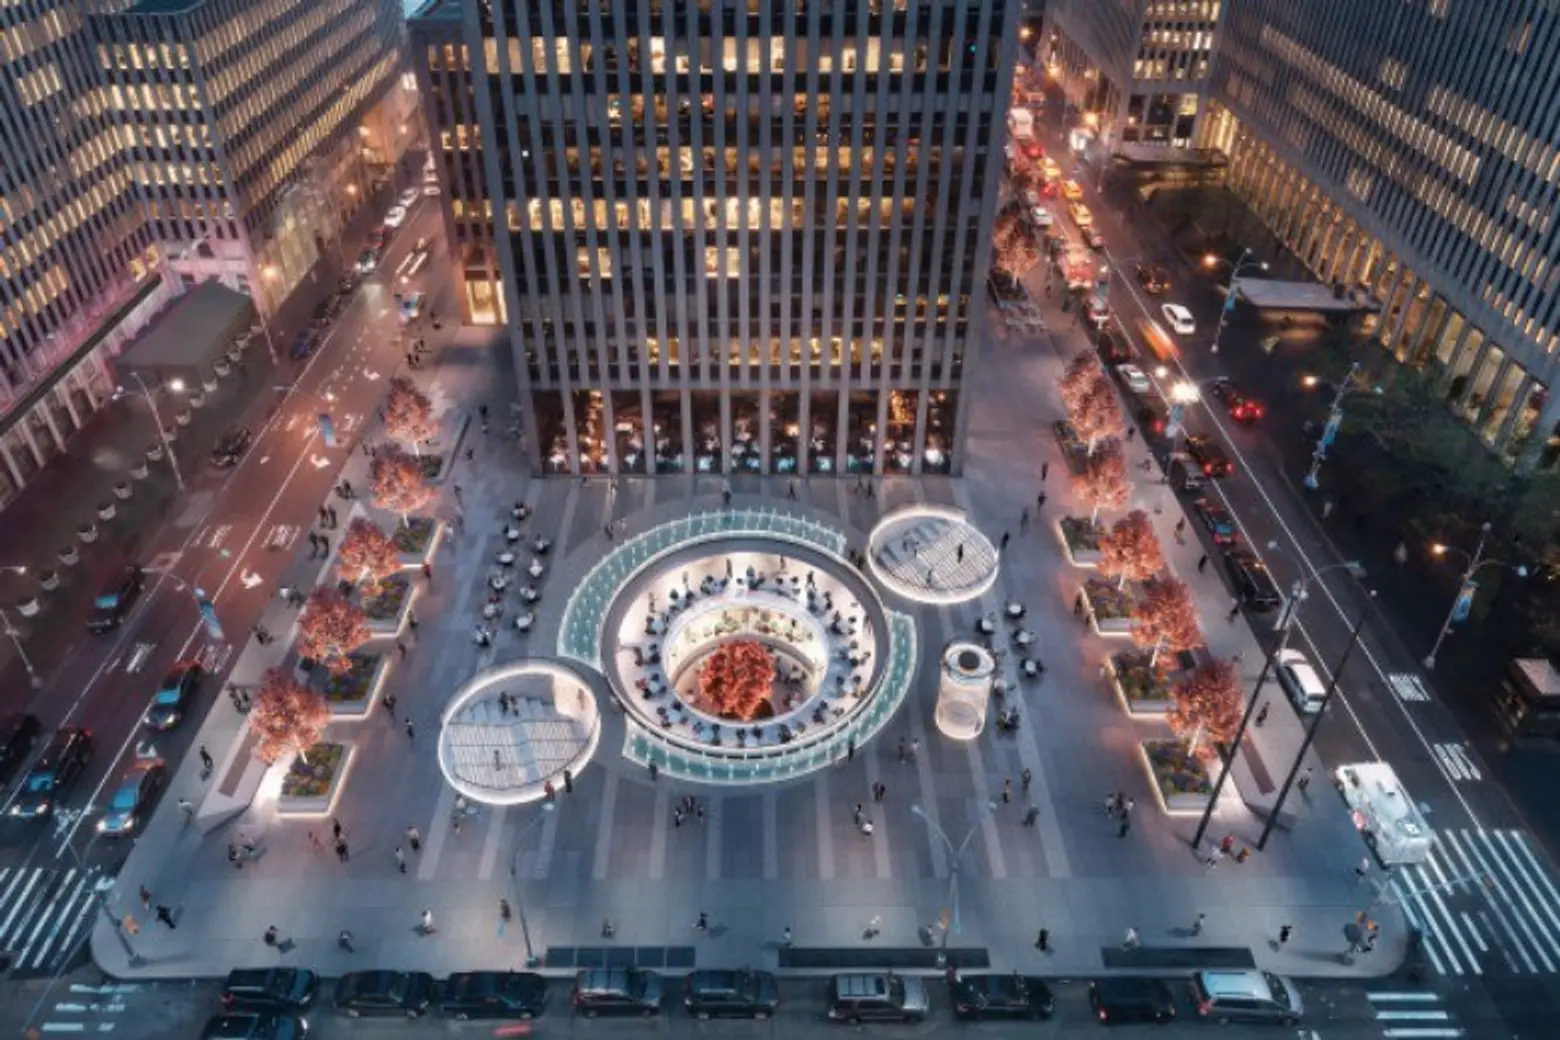 Rockefeller Plaza to get open, circular cutout in proposed makeover